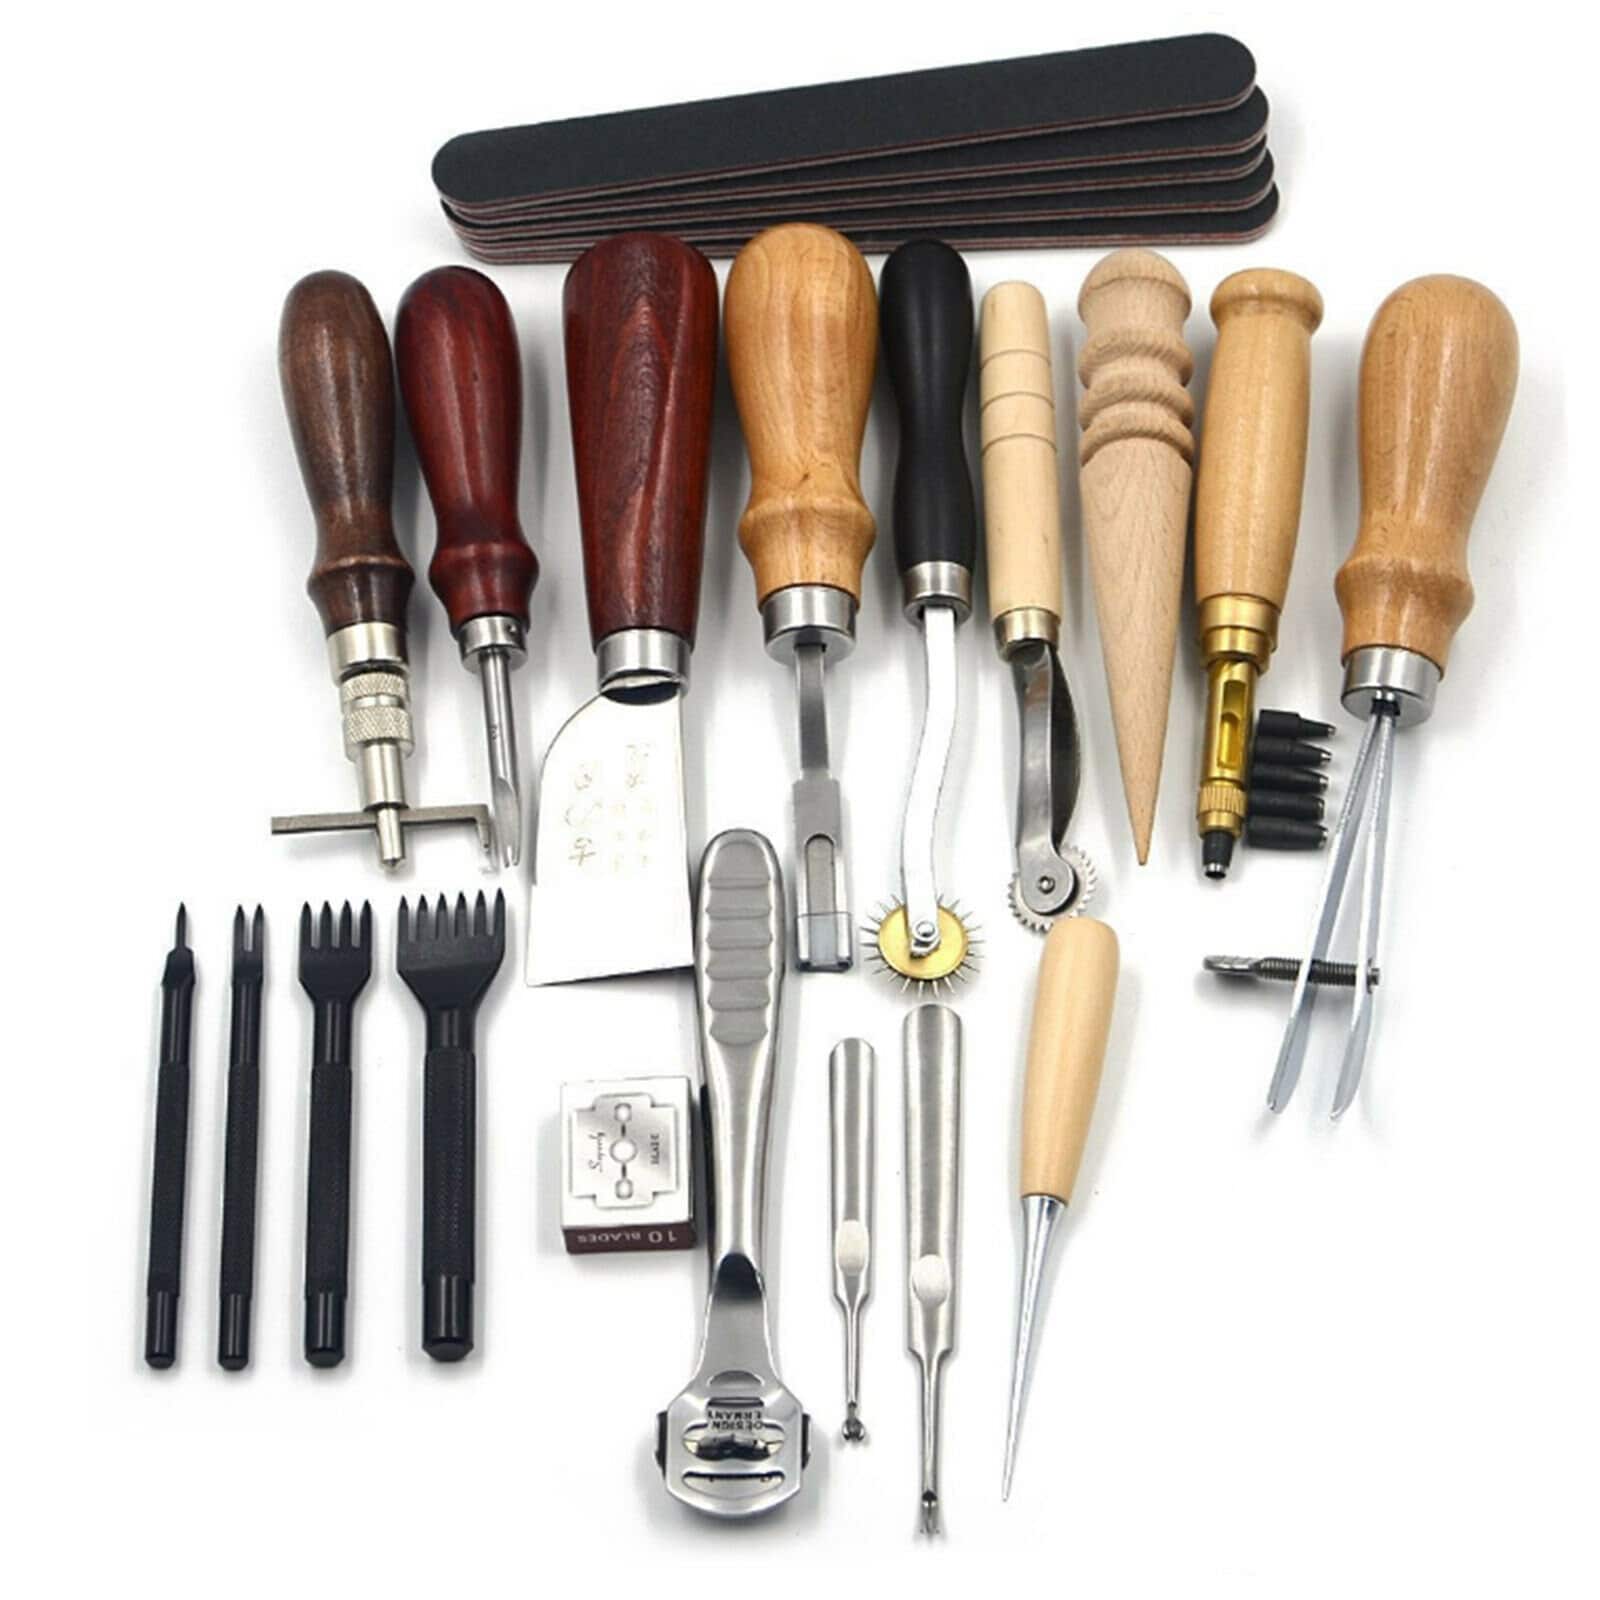 Leather Craft Tools Leather Working Tools Kit with Custom Storage Bag  Leather